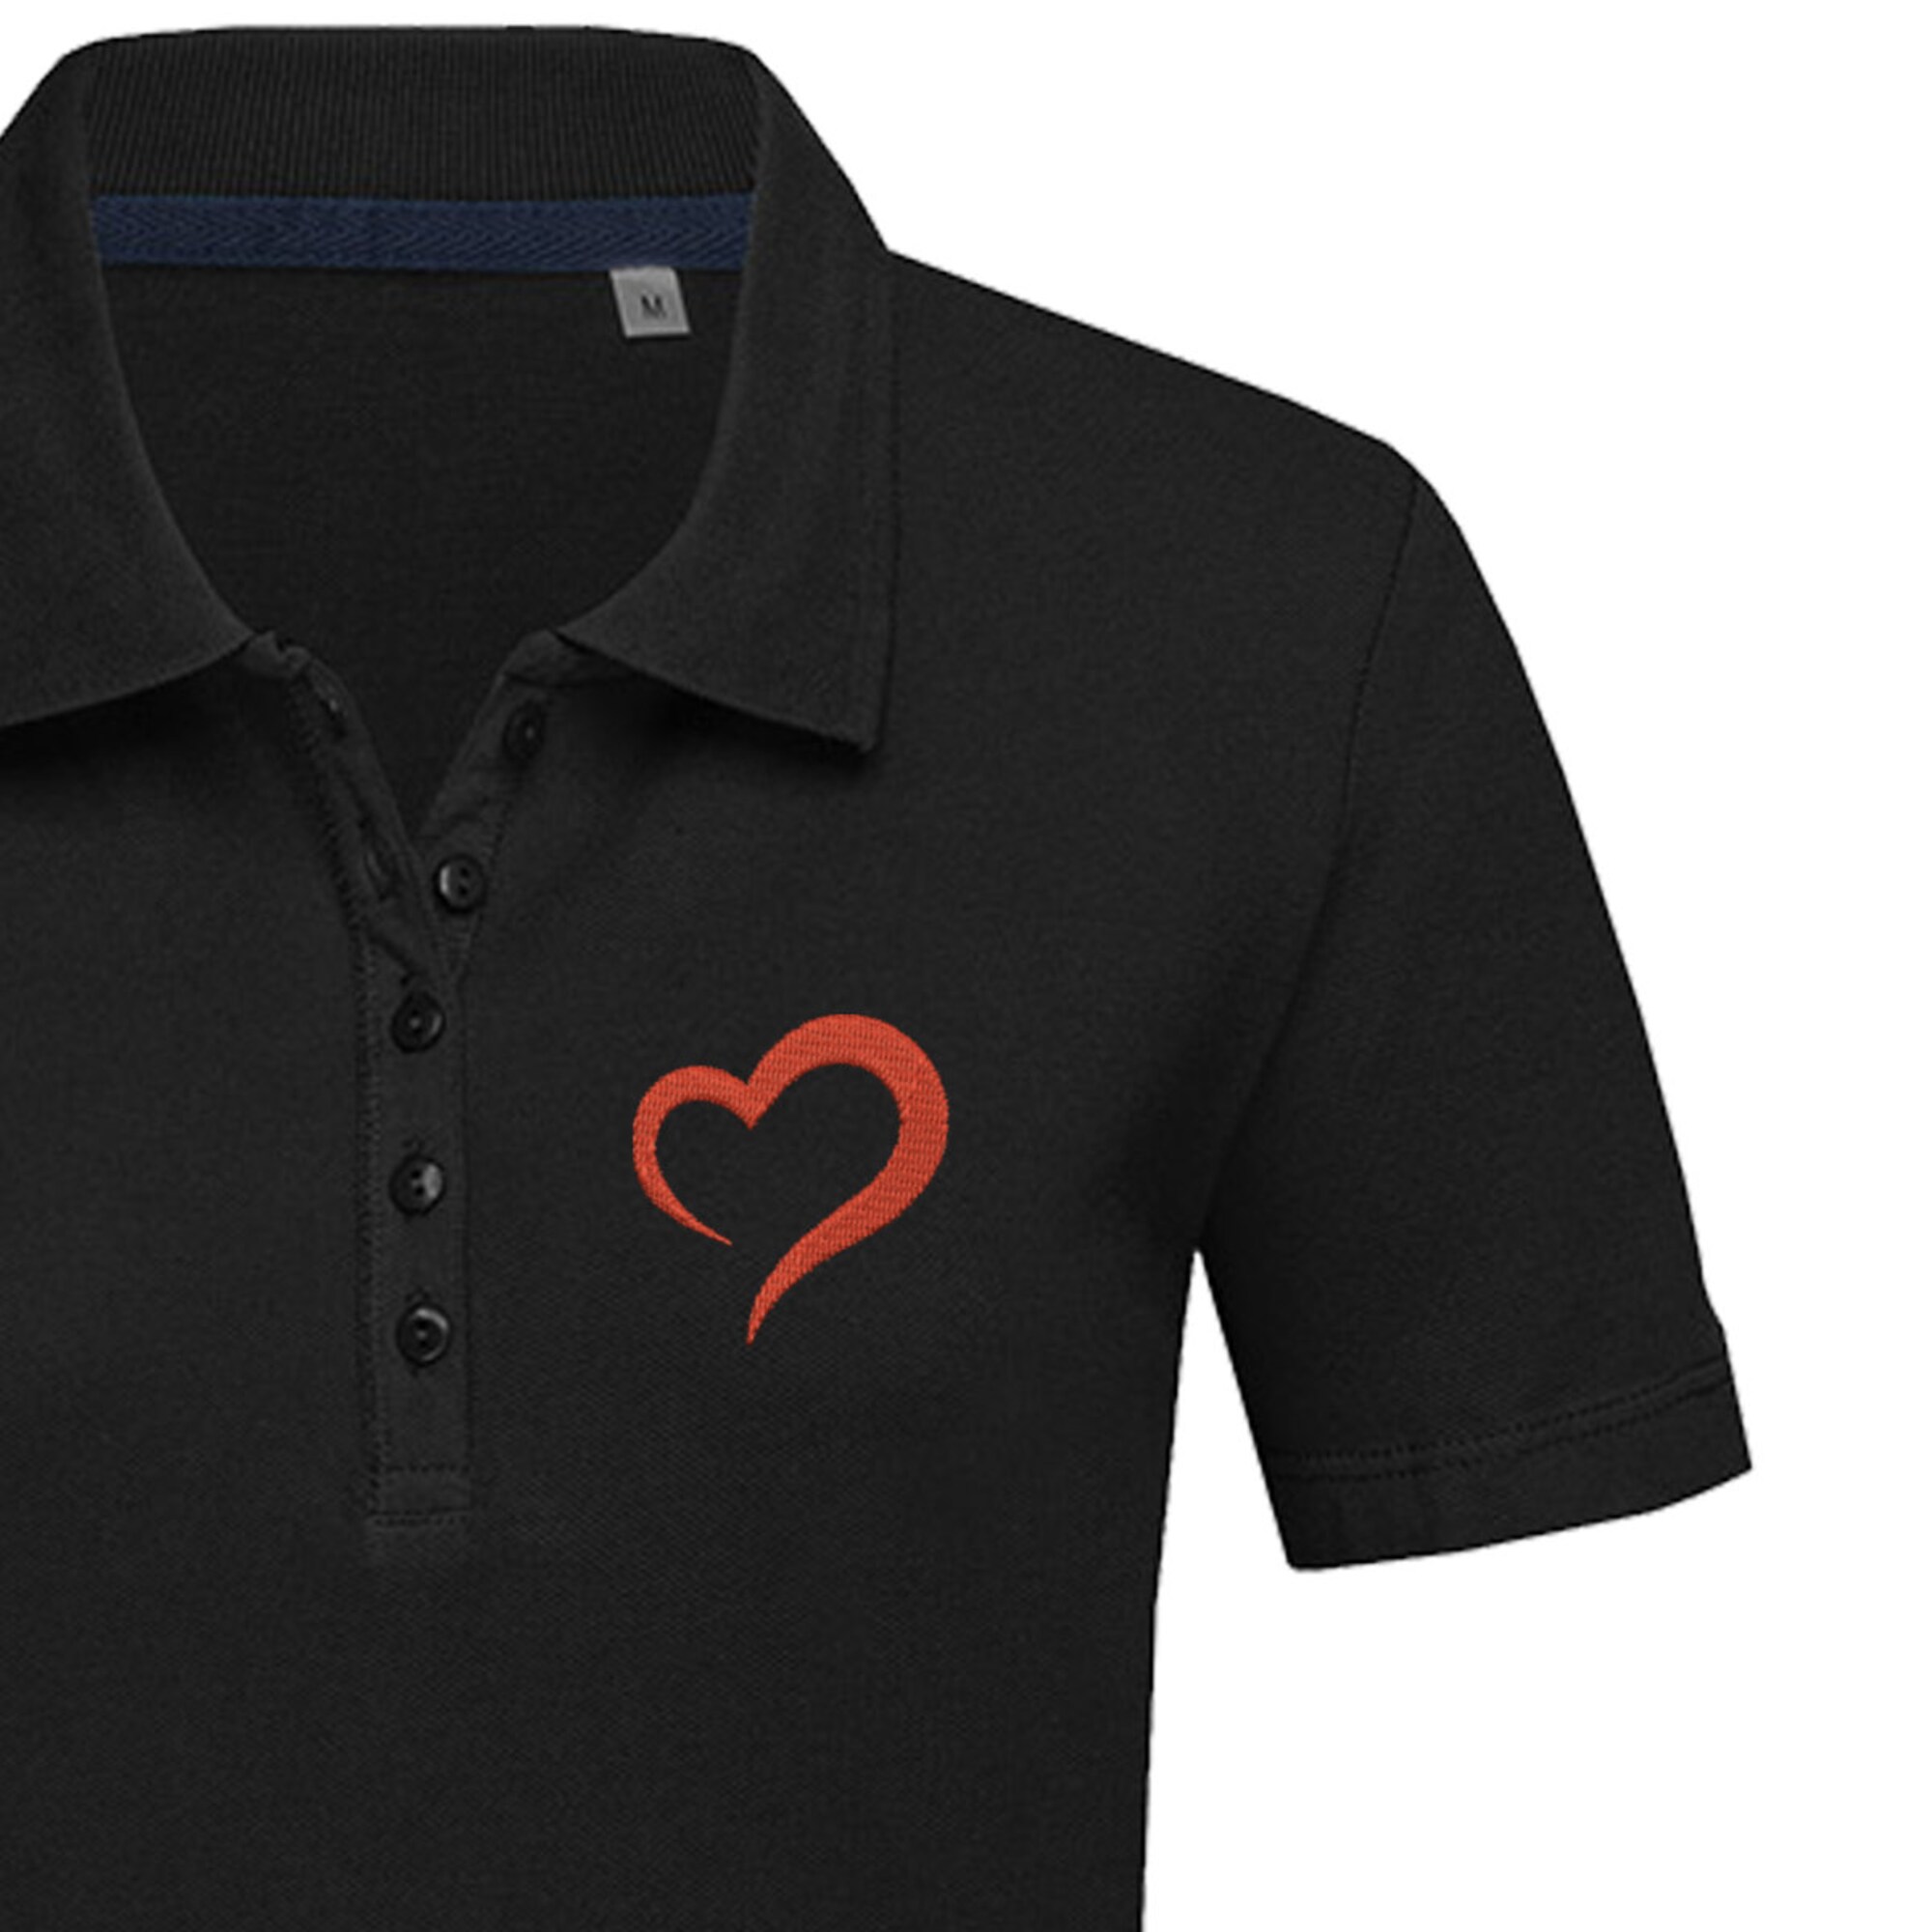 Discover Heart Embroidered Polo Shirt For Ladies | Love Poloshirt